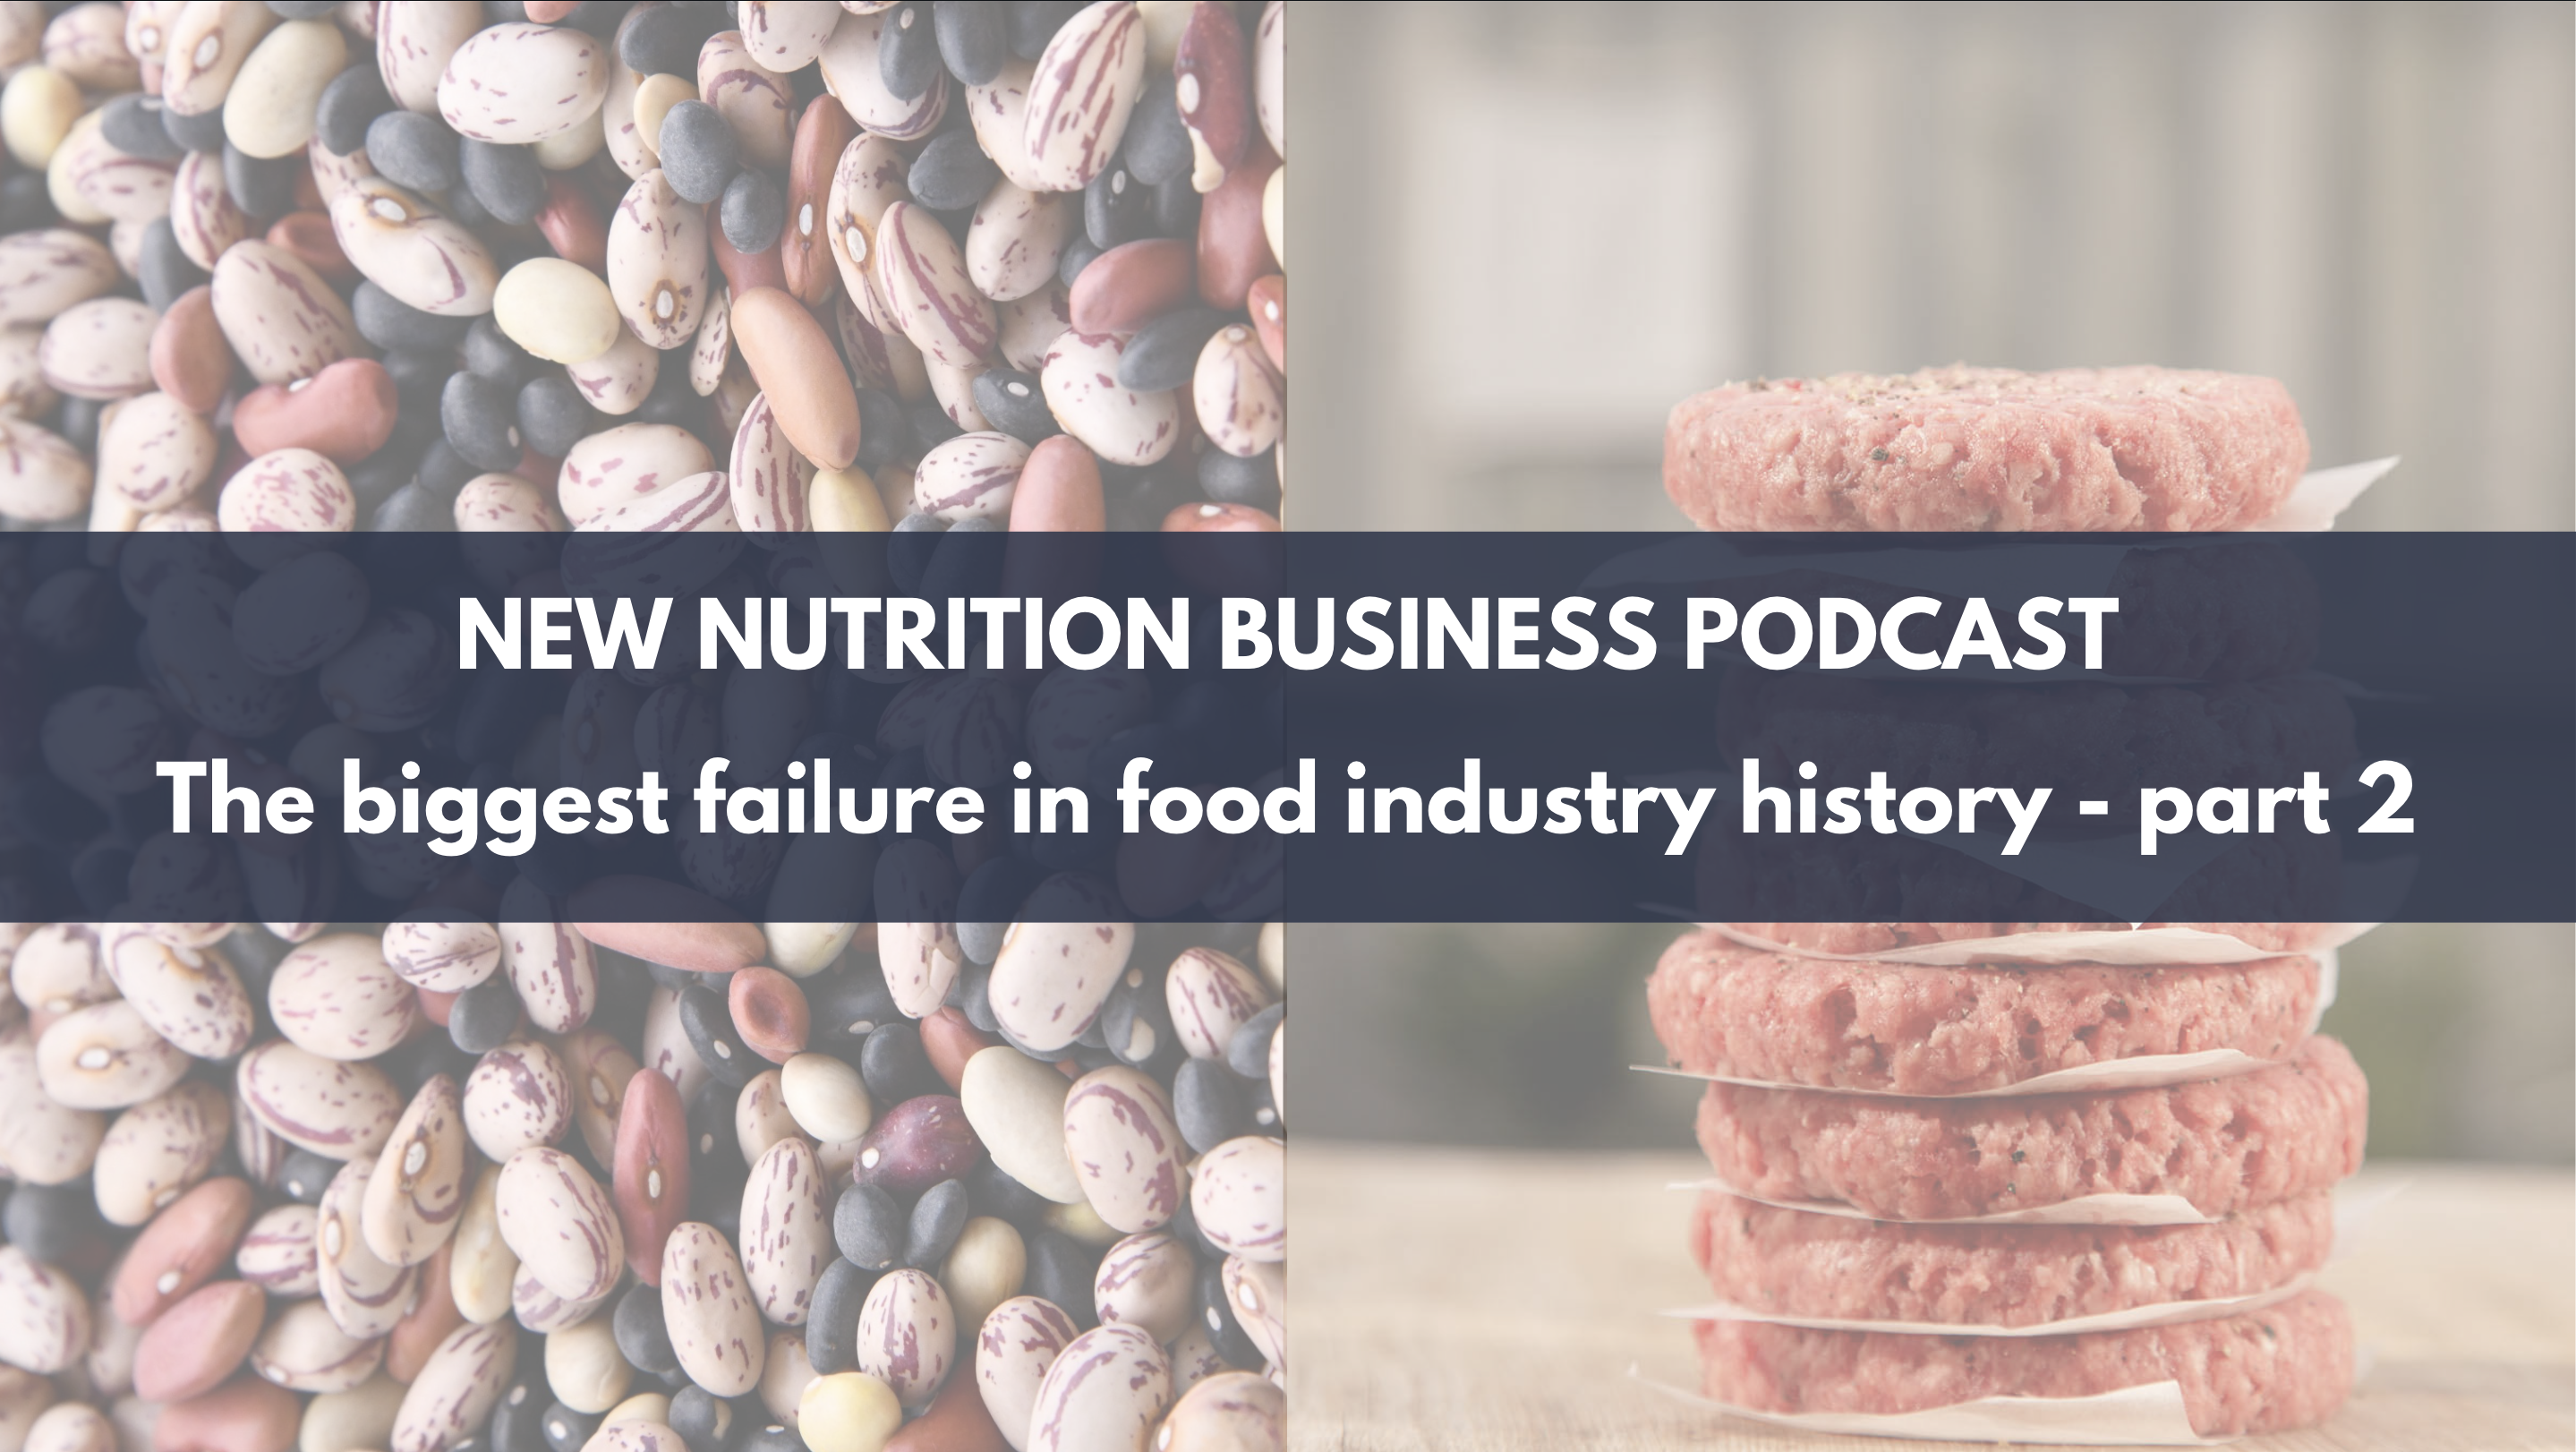 Podcast: The biggest failure in food industry history - part 2